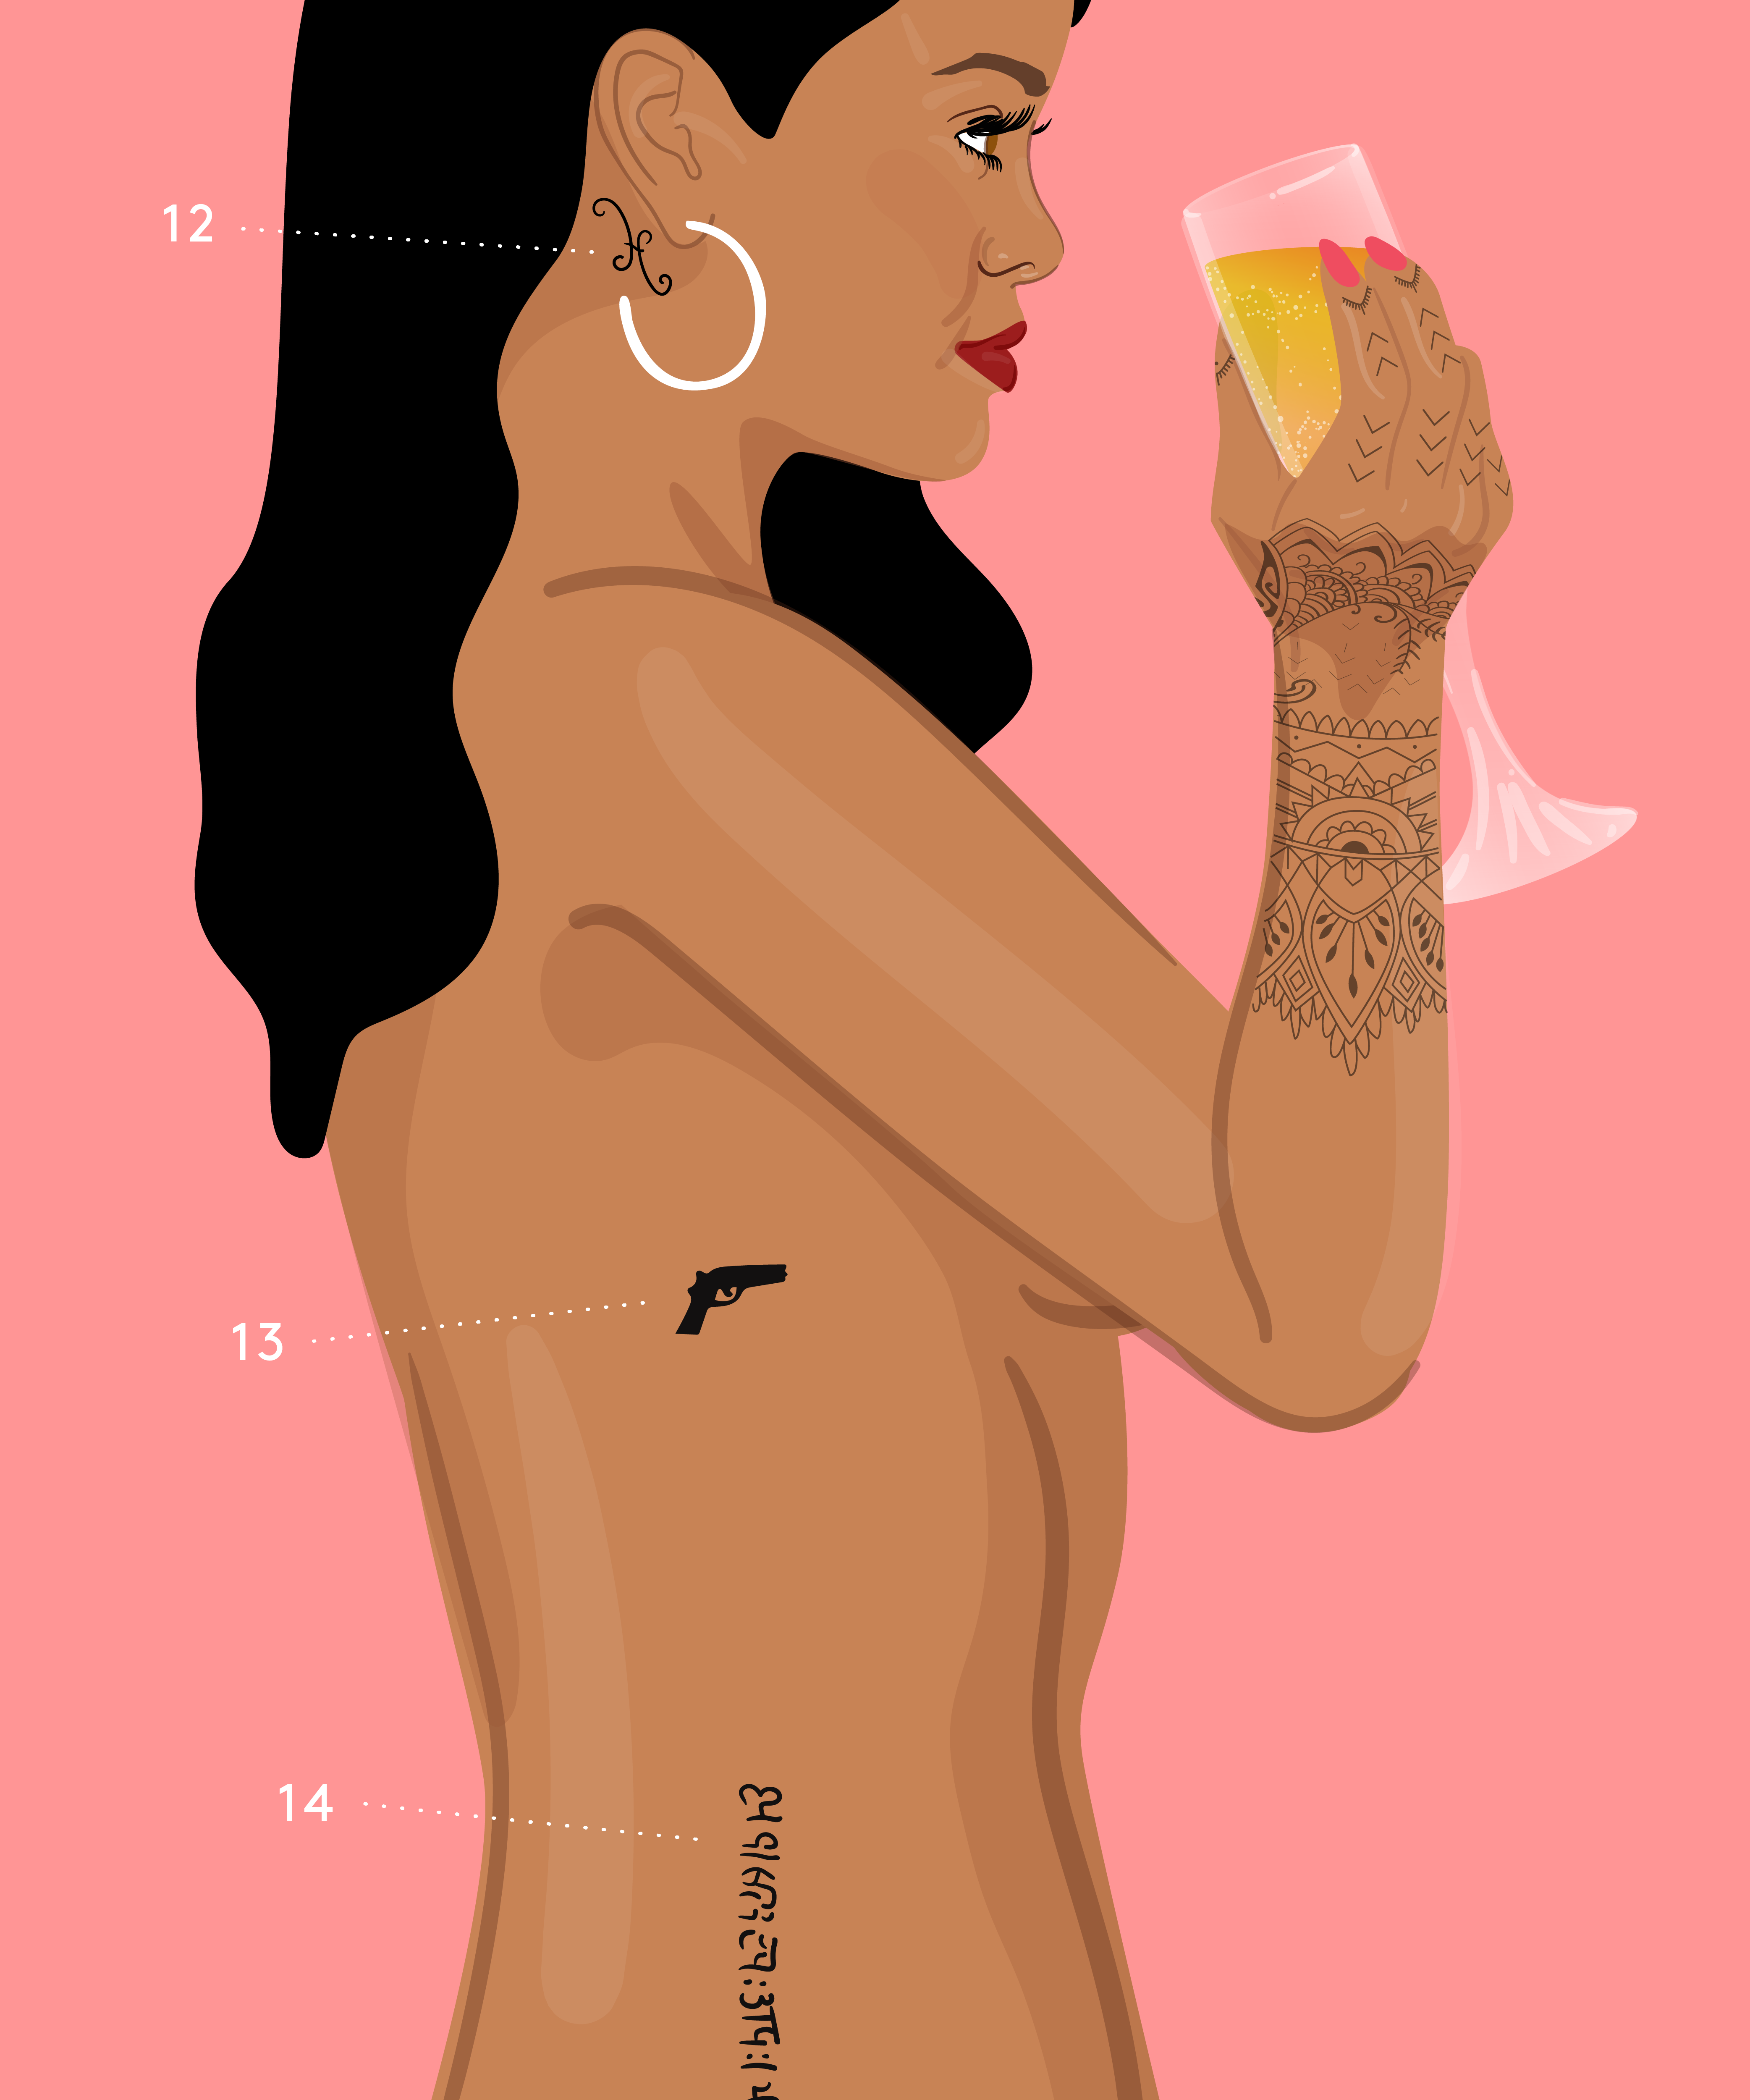 A Full Guide To Rihanna's Best Tattoos